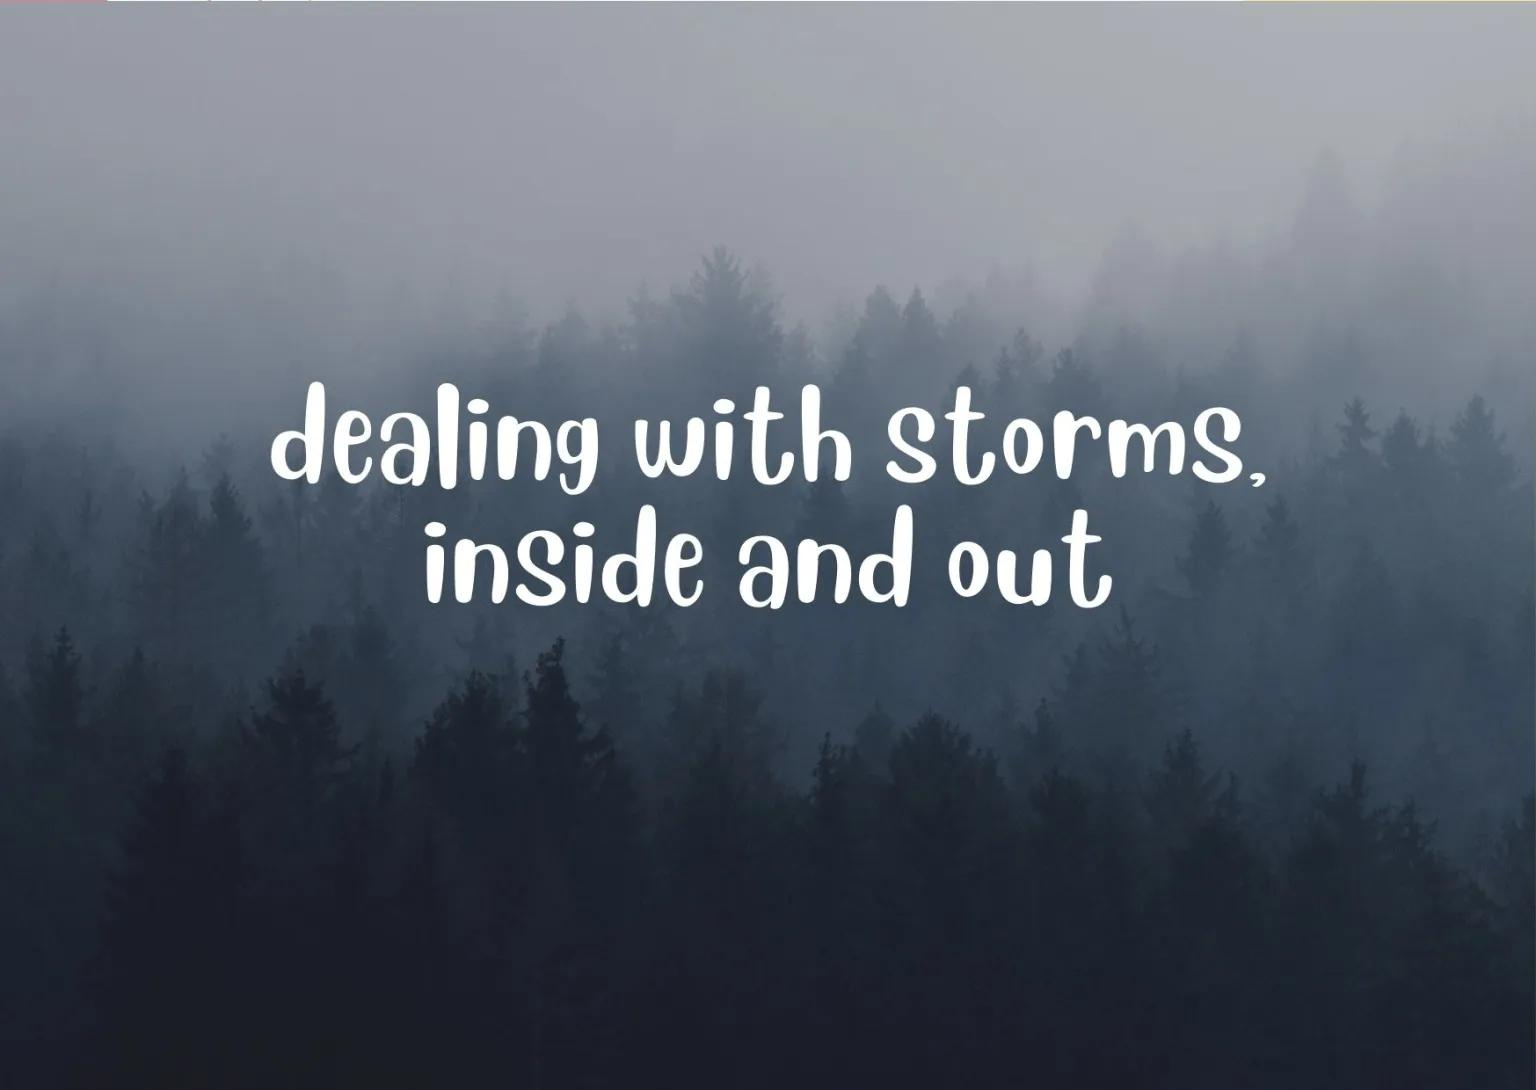 dealing with storms. inside and out